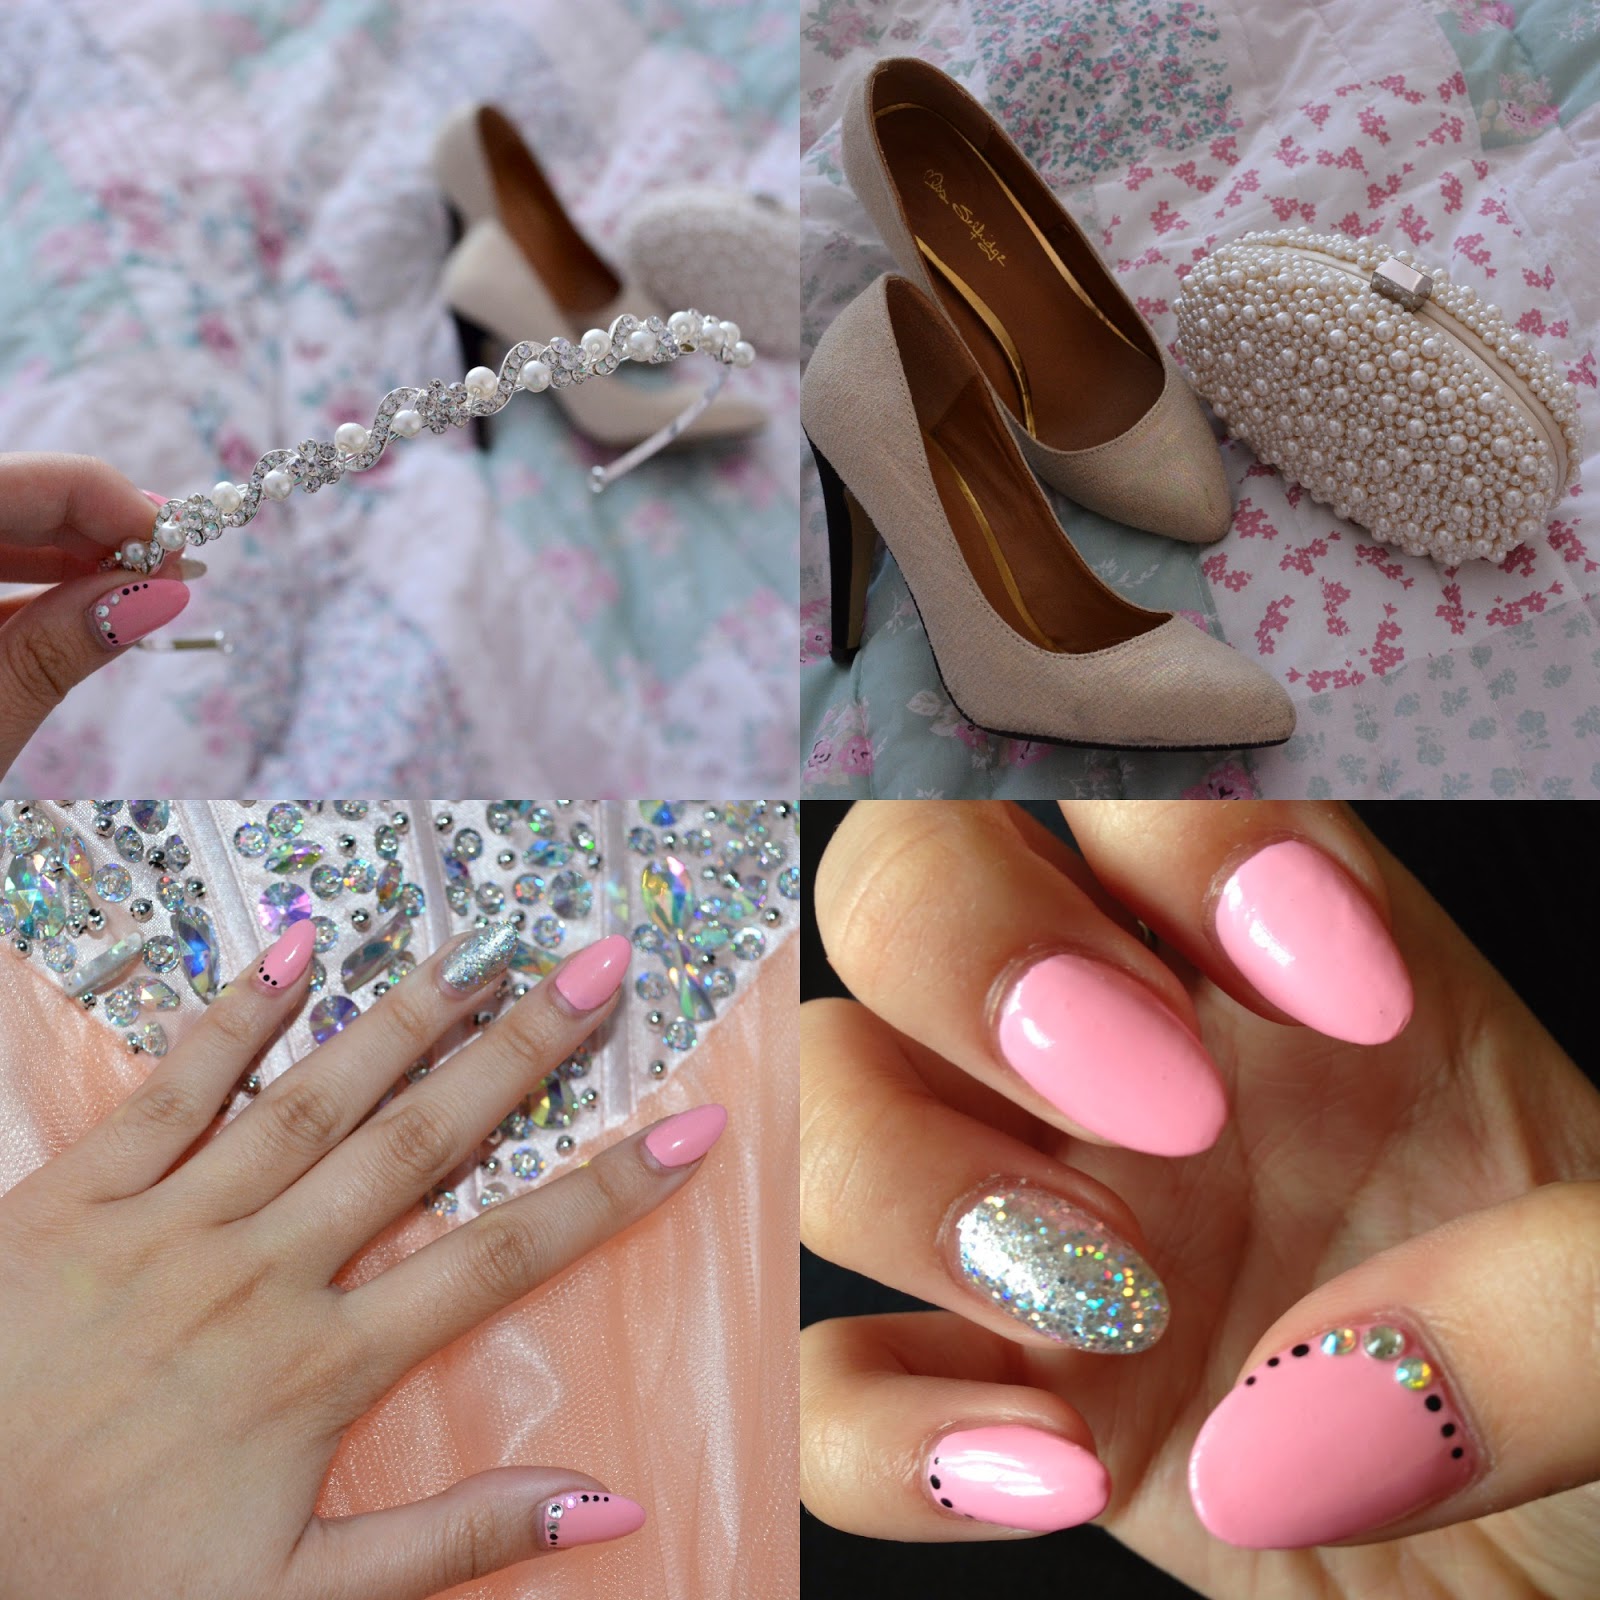 Prom, Prom 2014, Prom accessories, Prom Shoes, Nails Manicure